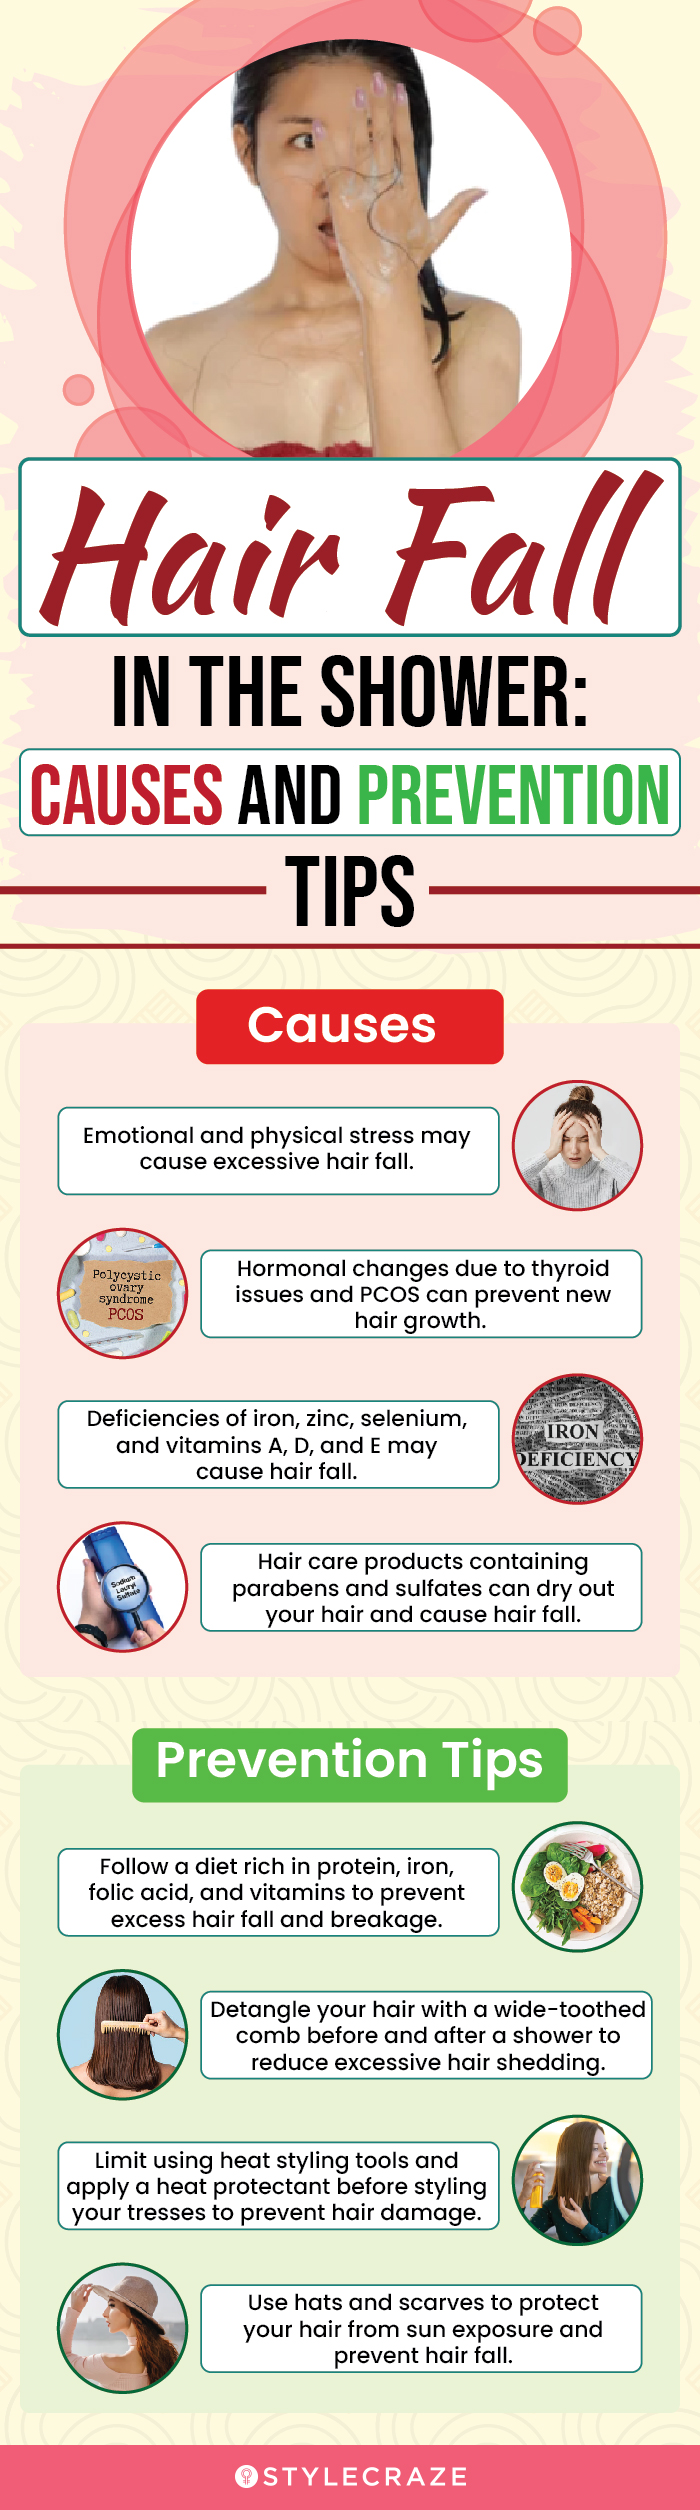 5 Common Causes of Hair Loss in Shower and How to Prevent Them